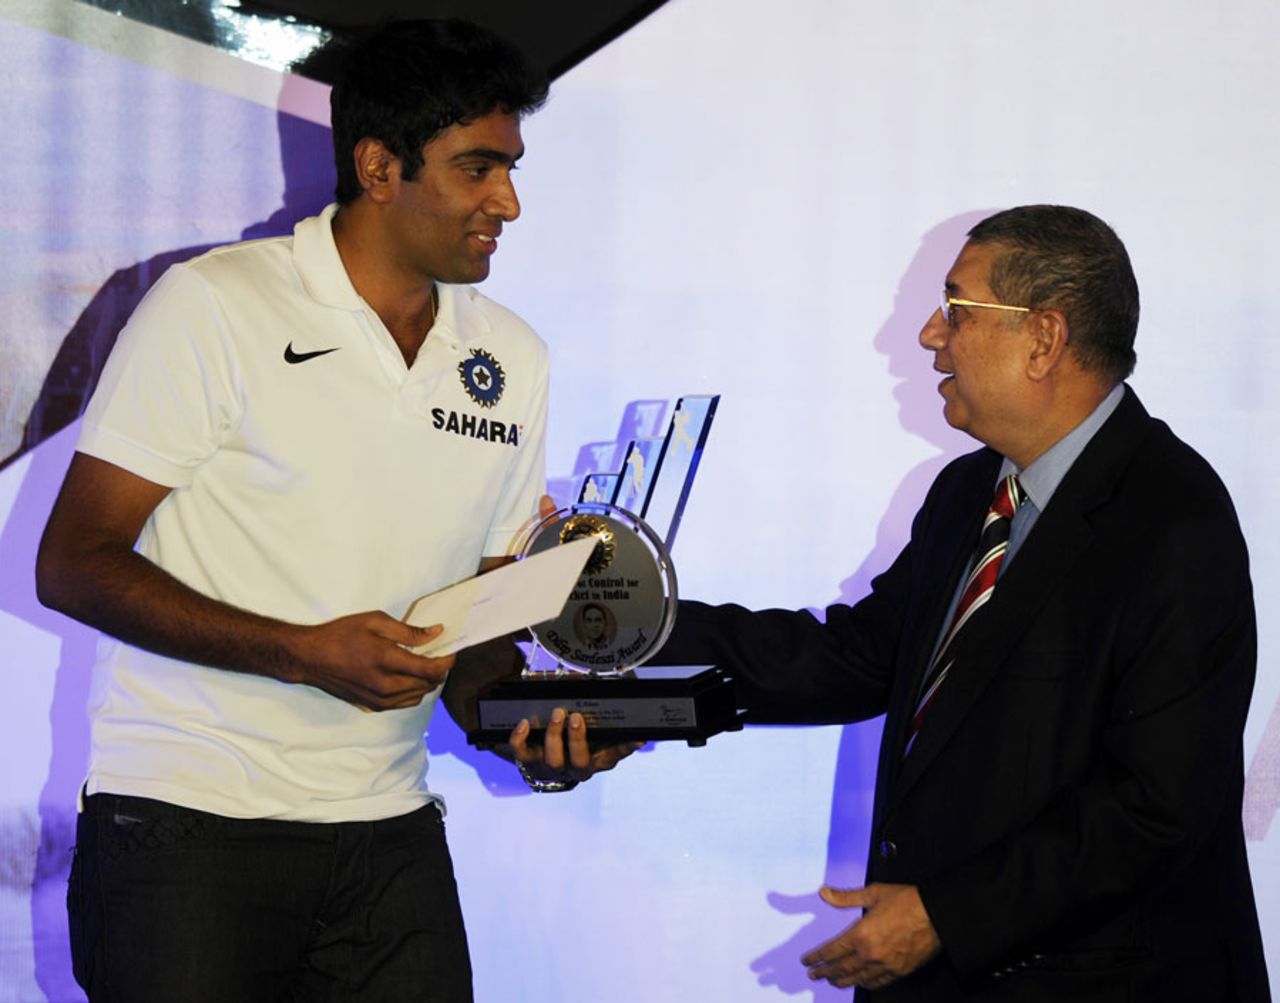 R Ashwin receives his Dileep Sardesai award from BCCI president N Srinivasan for being the best performer in the home Test series against West Indies, Chennai, December 10, 2011